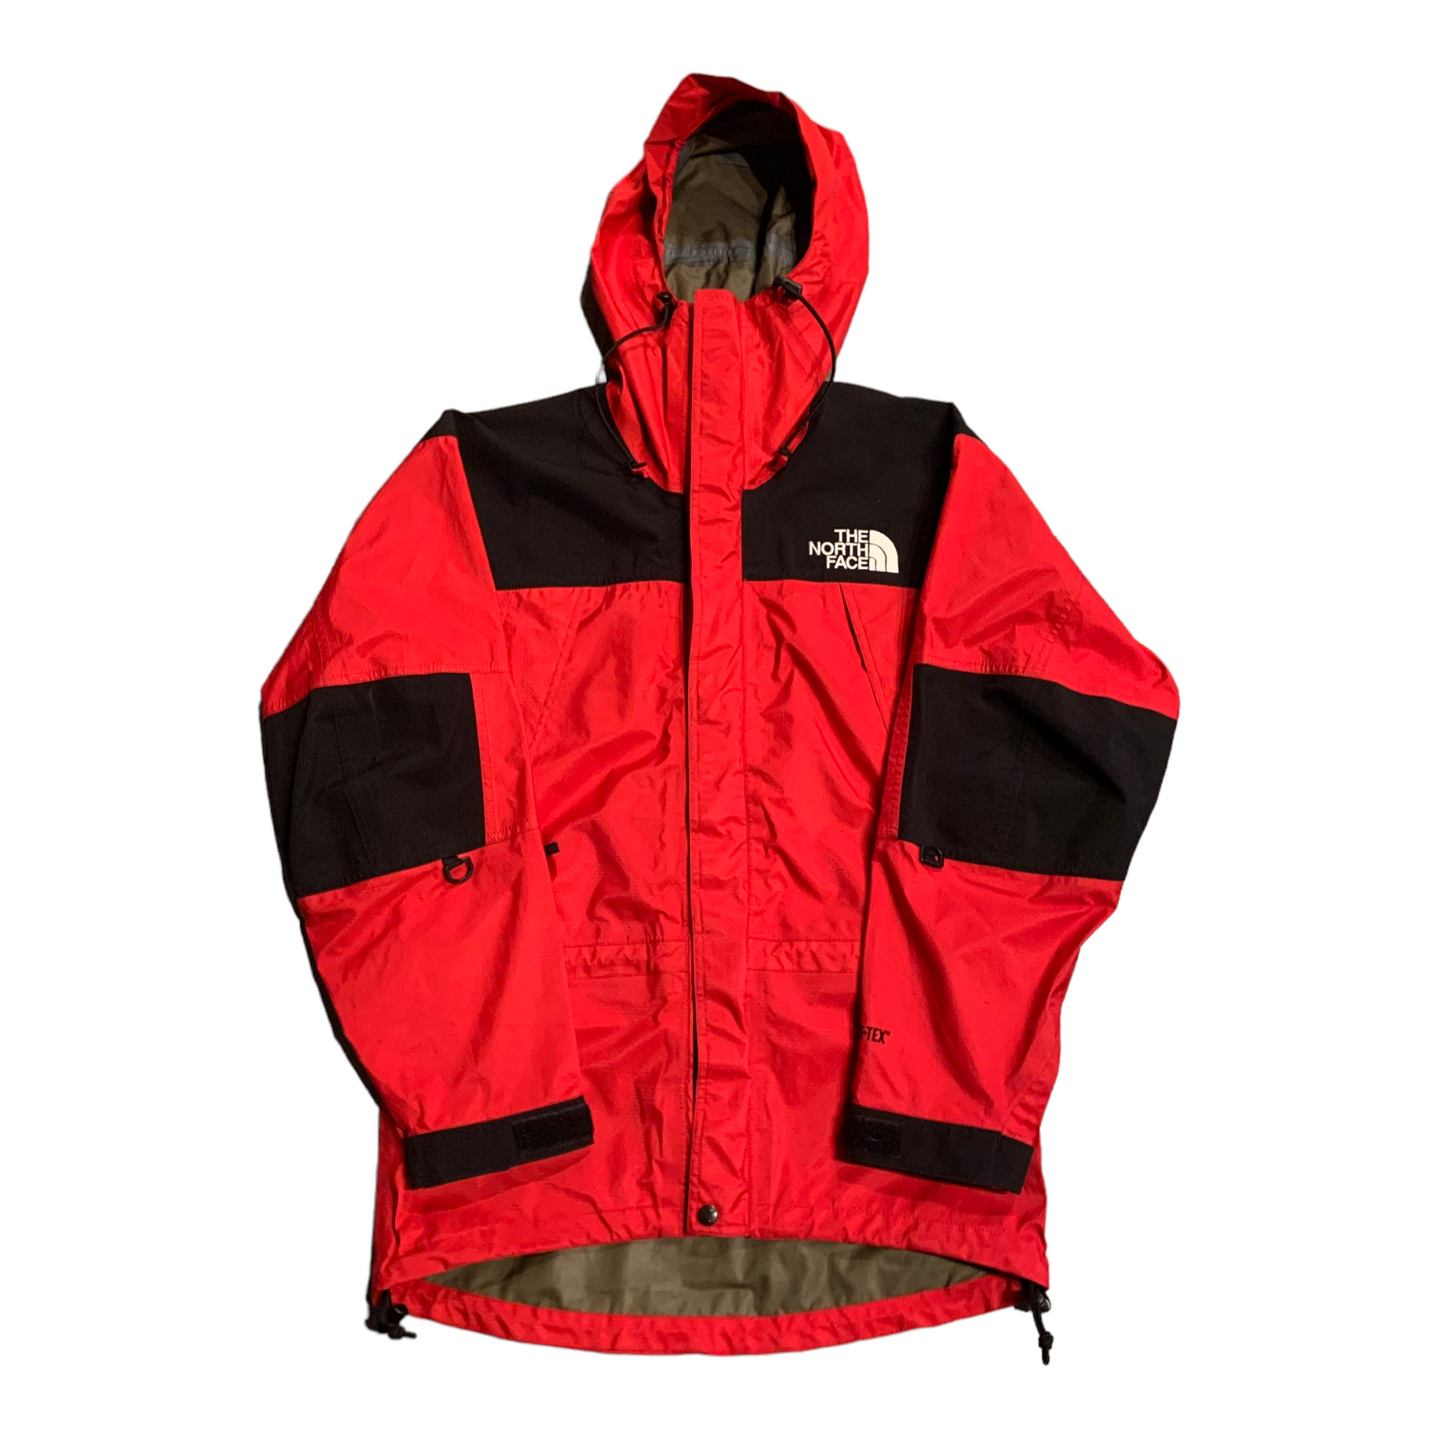 The North Face Gore-Tex shell jacket S/M